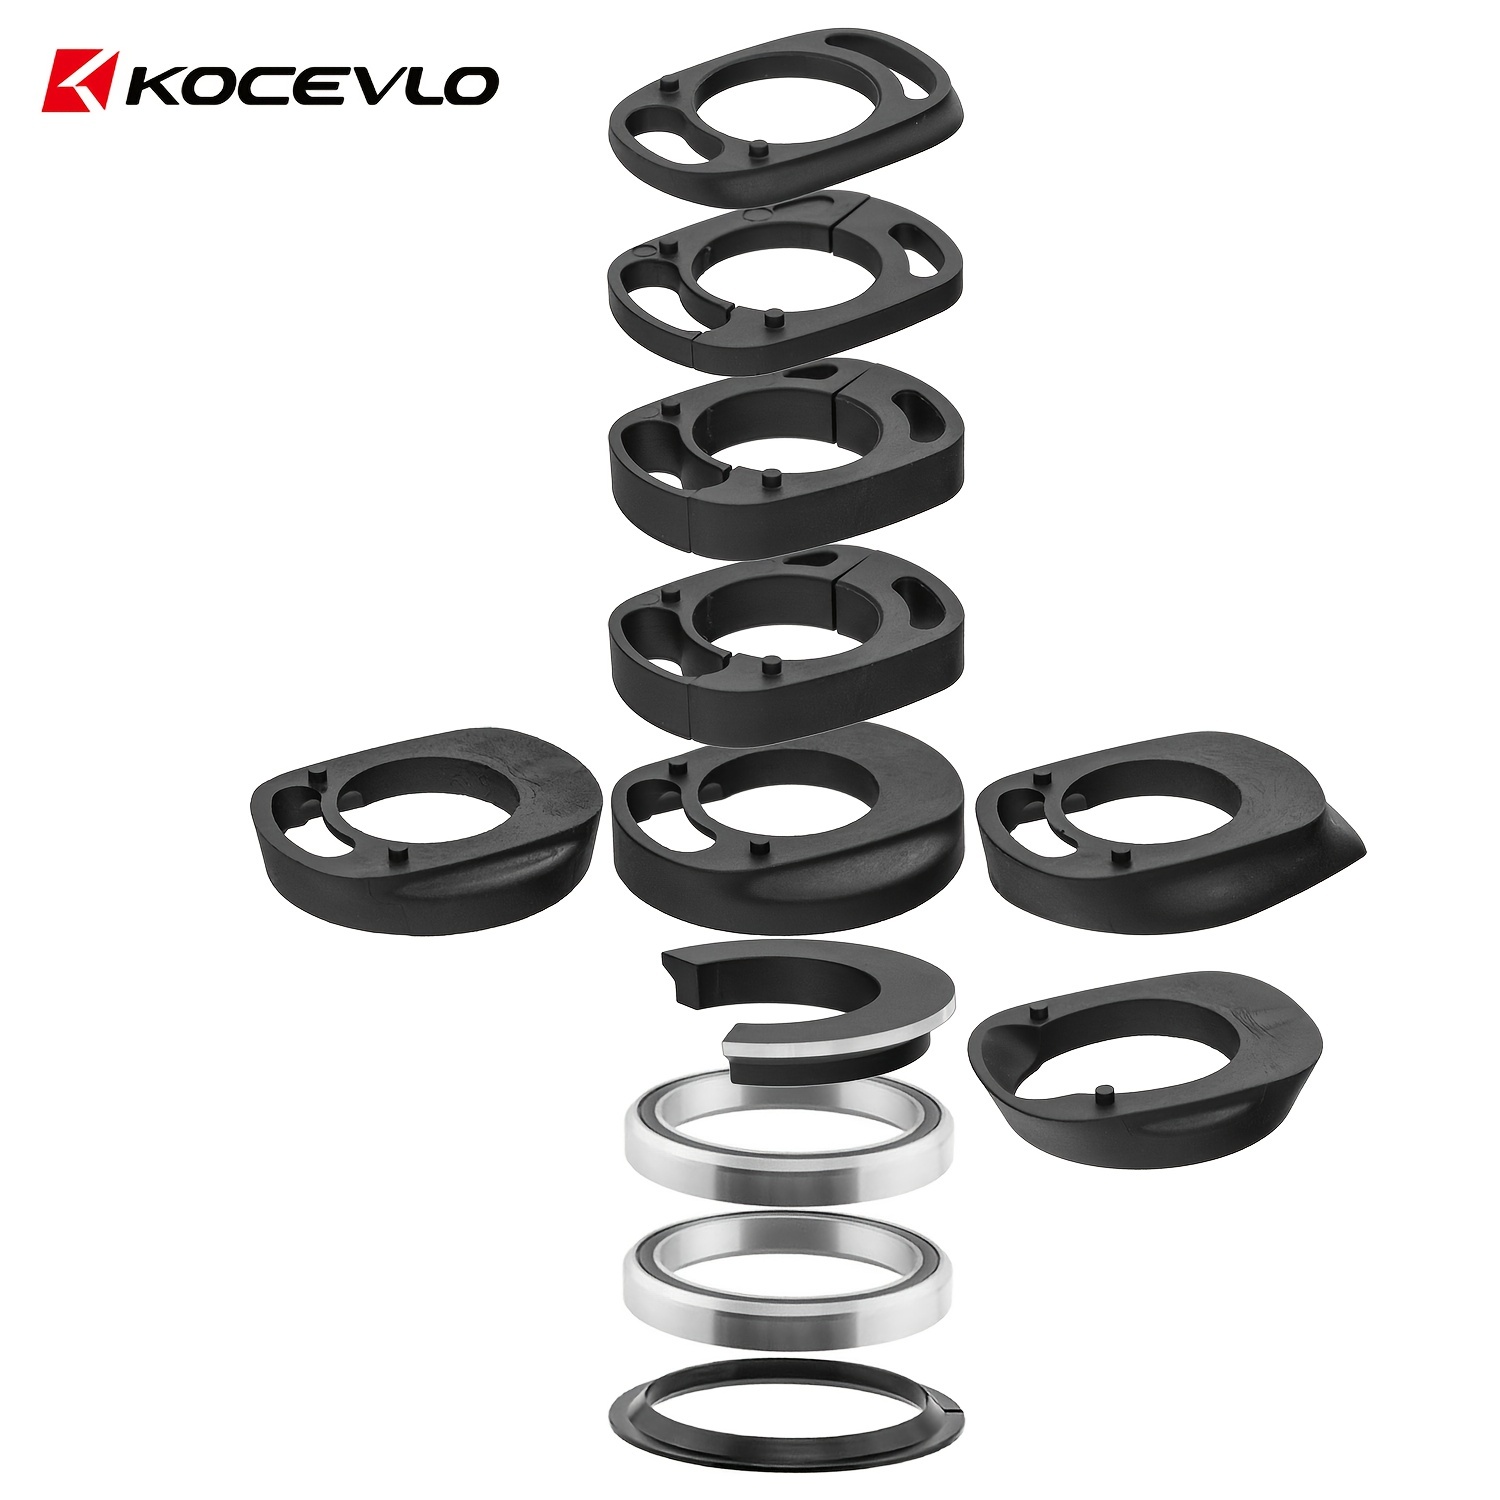 Kocevlo Cycling Mountain Bike 28.6mm Headset, Steel Bicycle Head Bearing  Headset Accessories (Spacers, Top/low Headset Cover )